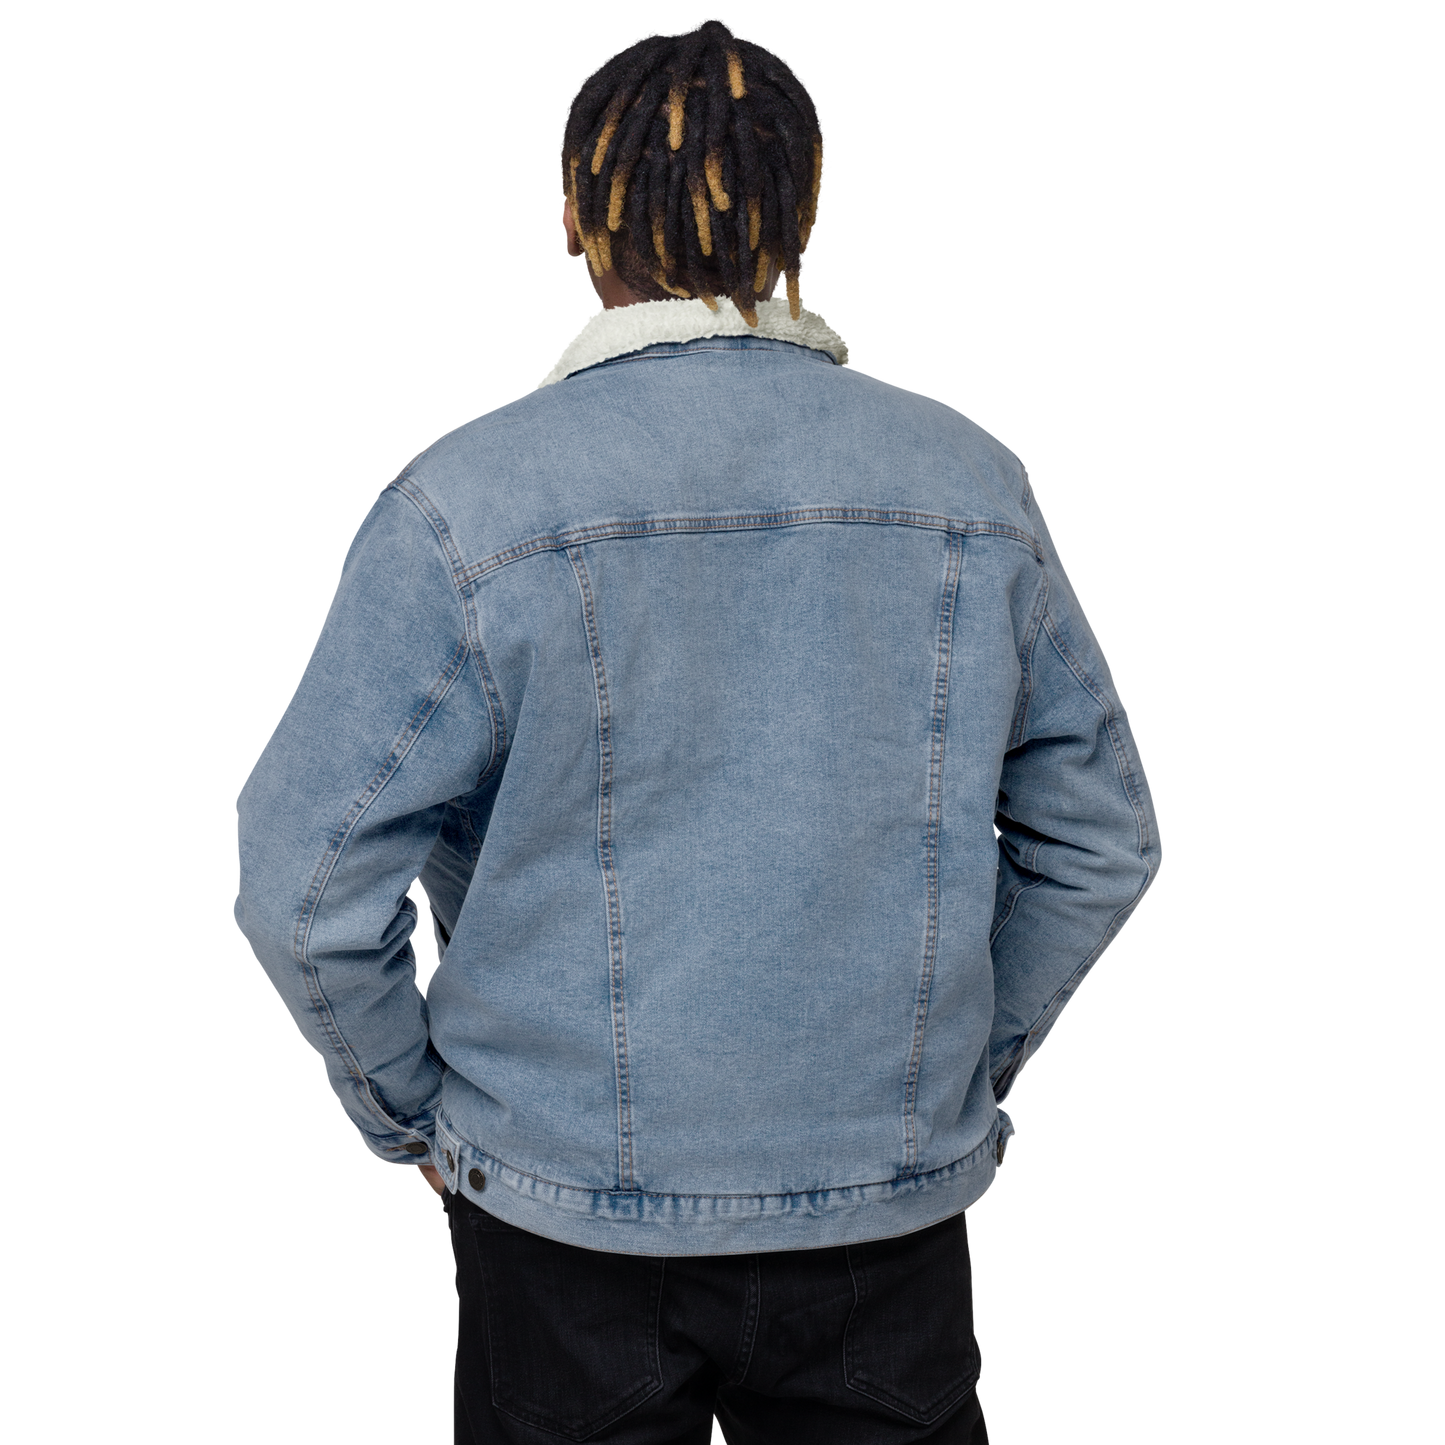 YHM Designs - YQB Quebec City Denim Sherpa Jacket - Crossed-X Design with Airport Code and Vintage Propliner - Black & White Embroidery - Image 12